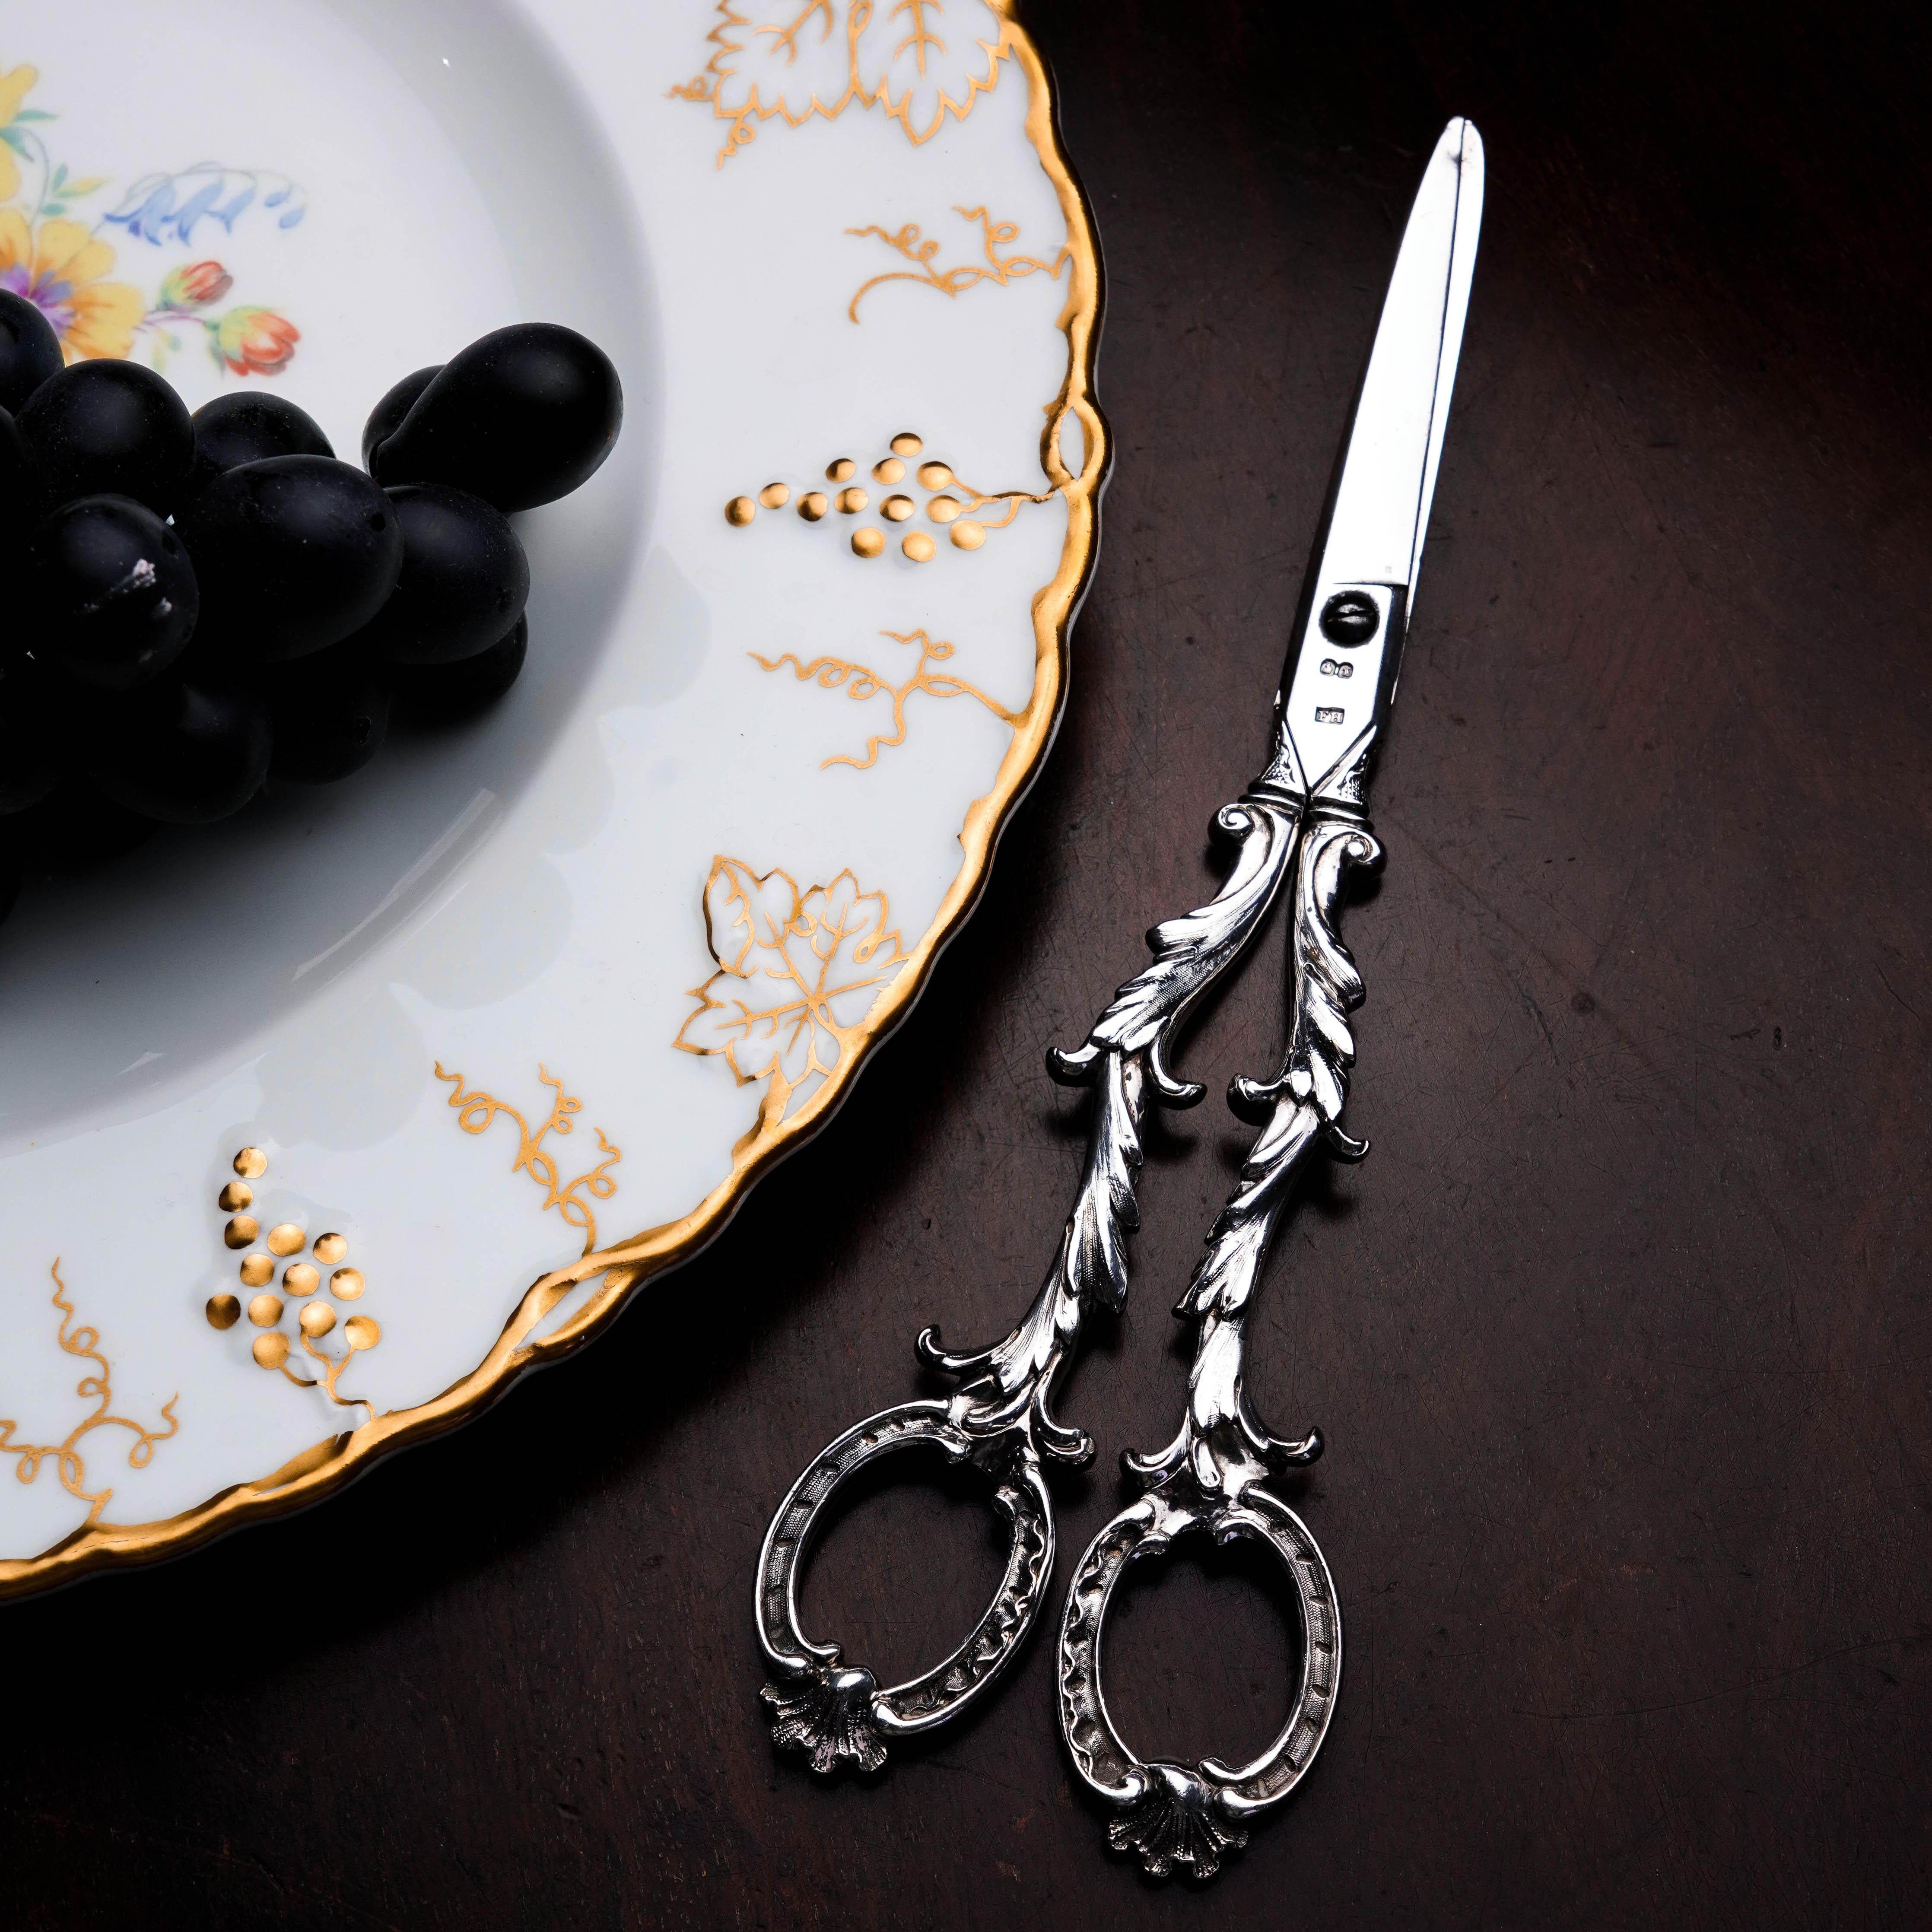 We are delighted to offer this fine quality, large & heavy Victorian solid silver grape scissors/shears made in London 1846 with the marks of Francis Higgins. 
 
Higgins' wares often feature an ornate, well thought out and intricate design that are